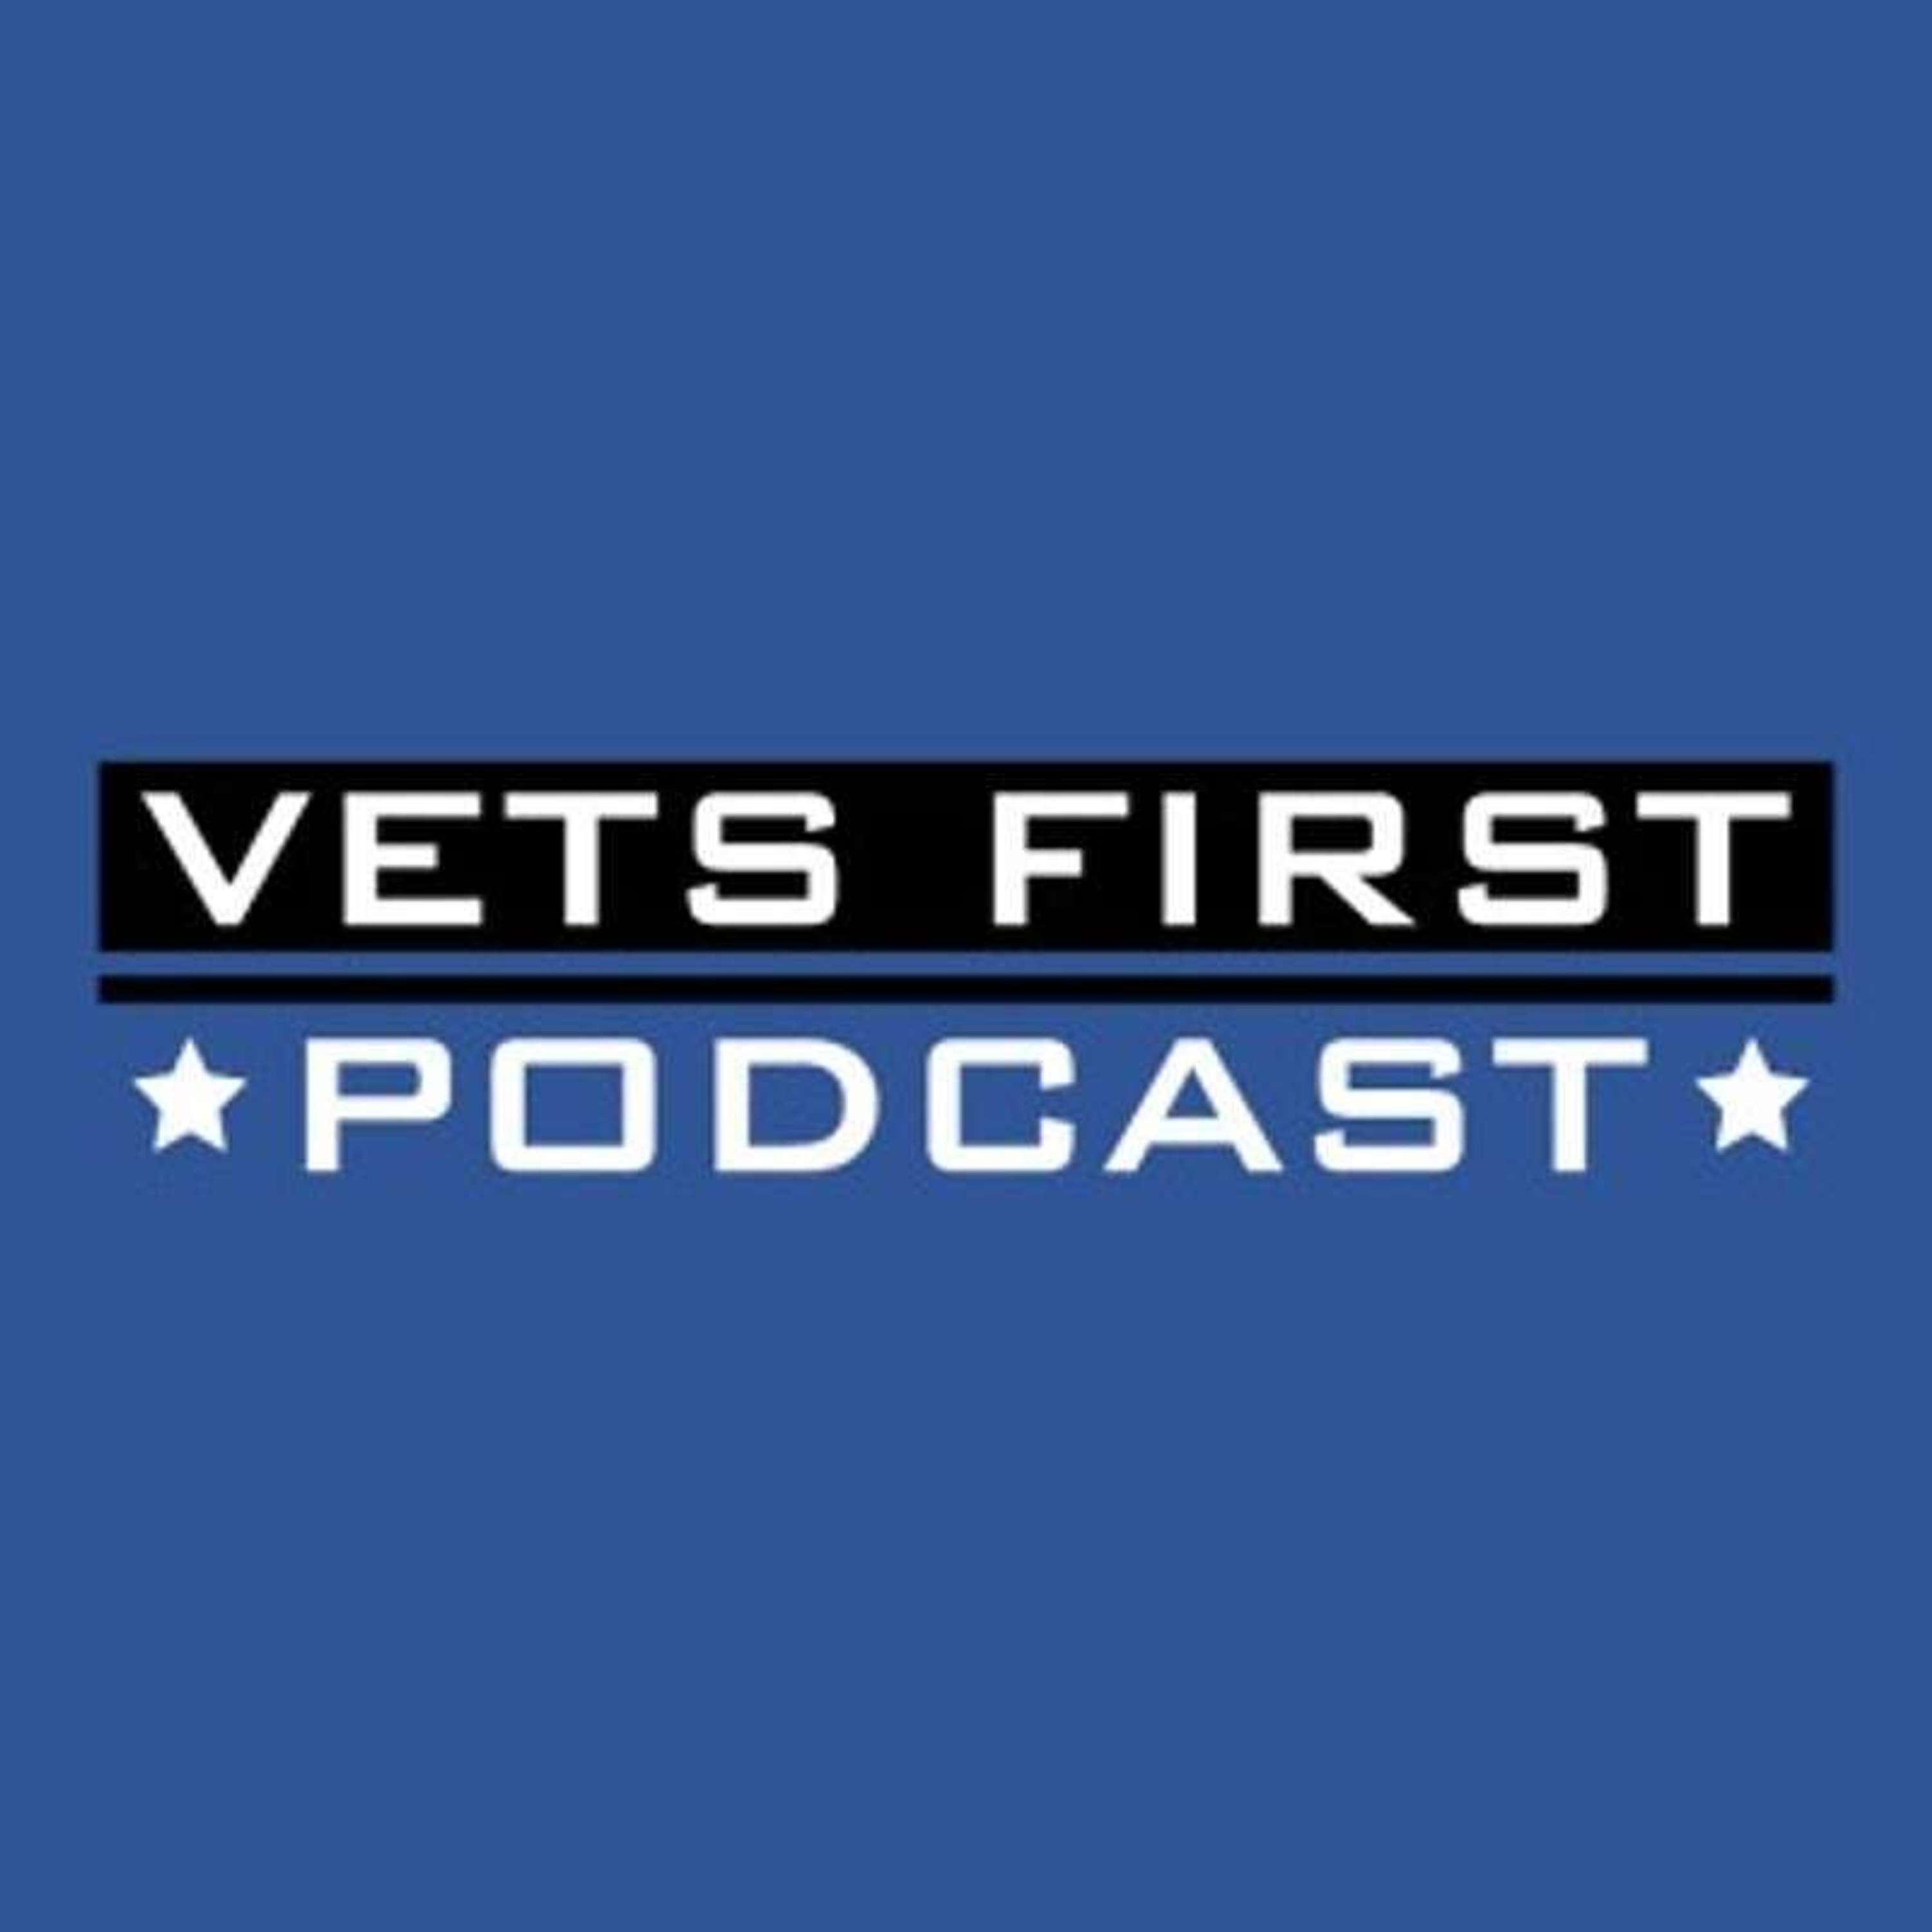 Season 2 Episode 2 – Not broken, just doing things differently: Director of Disability in Education for the Student Veterans of America, Dan Standage